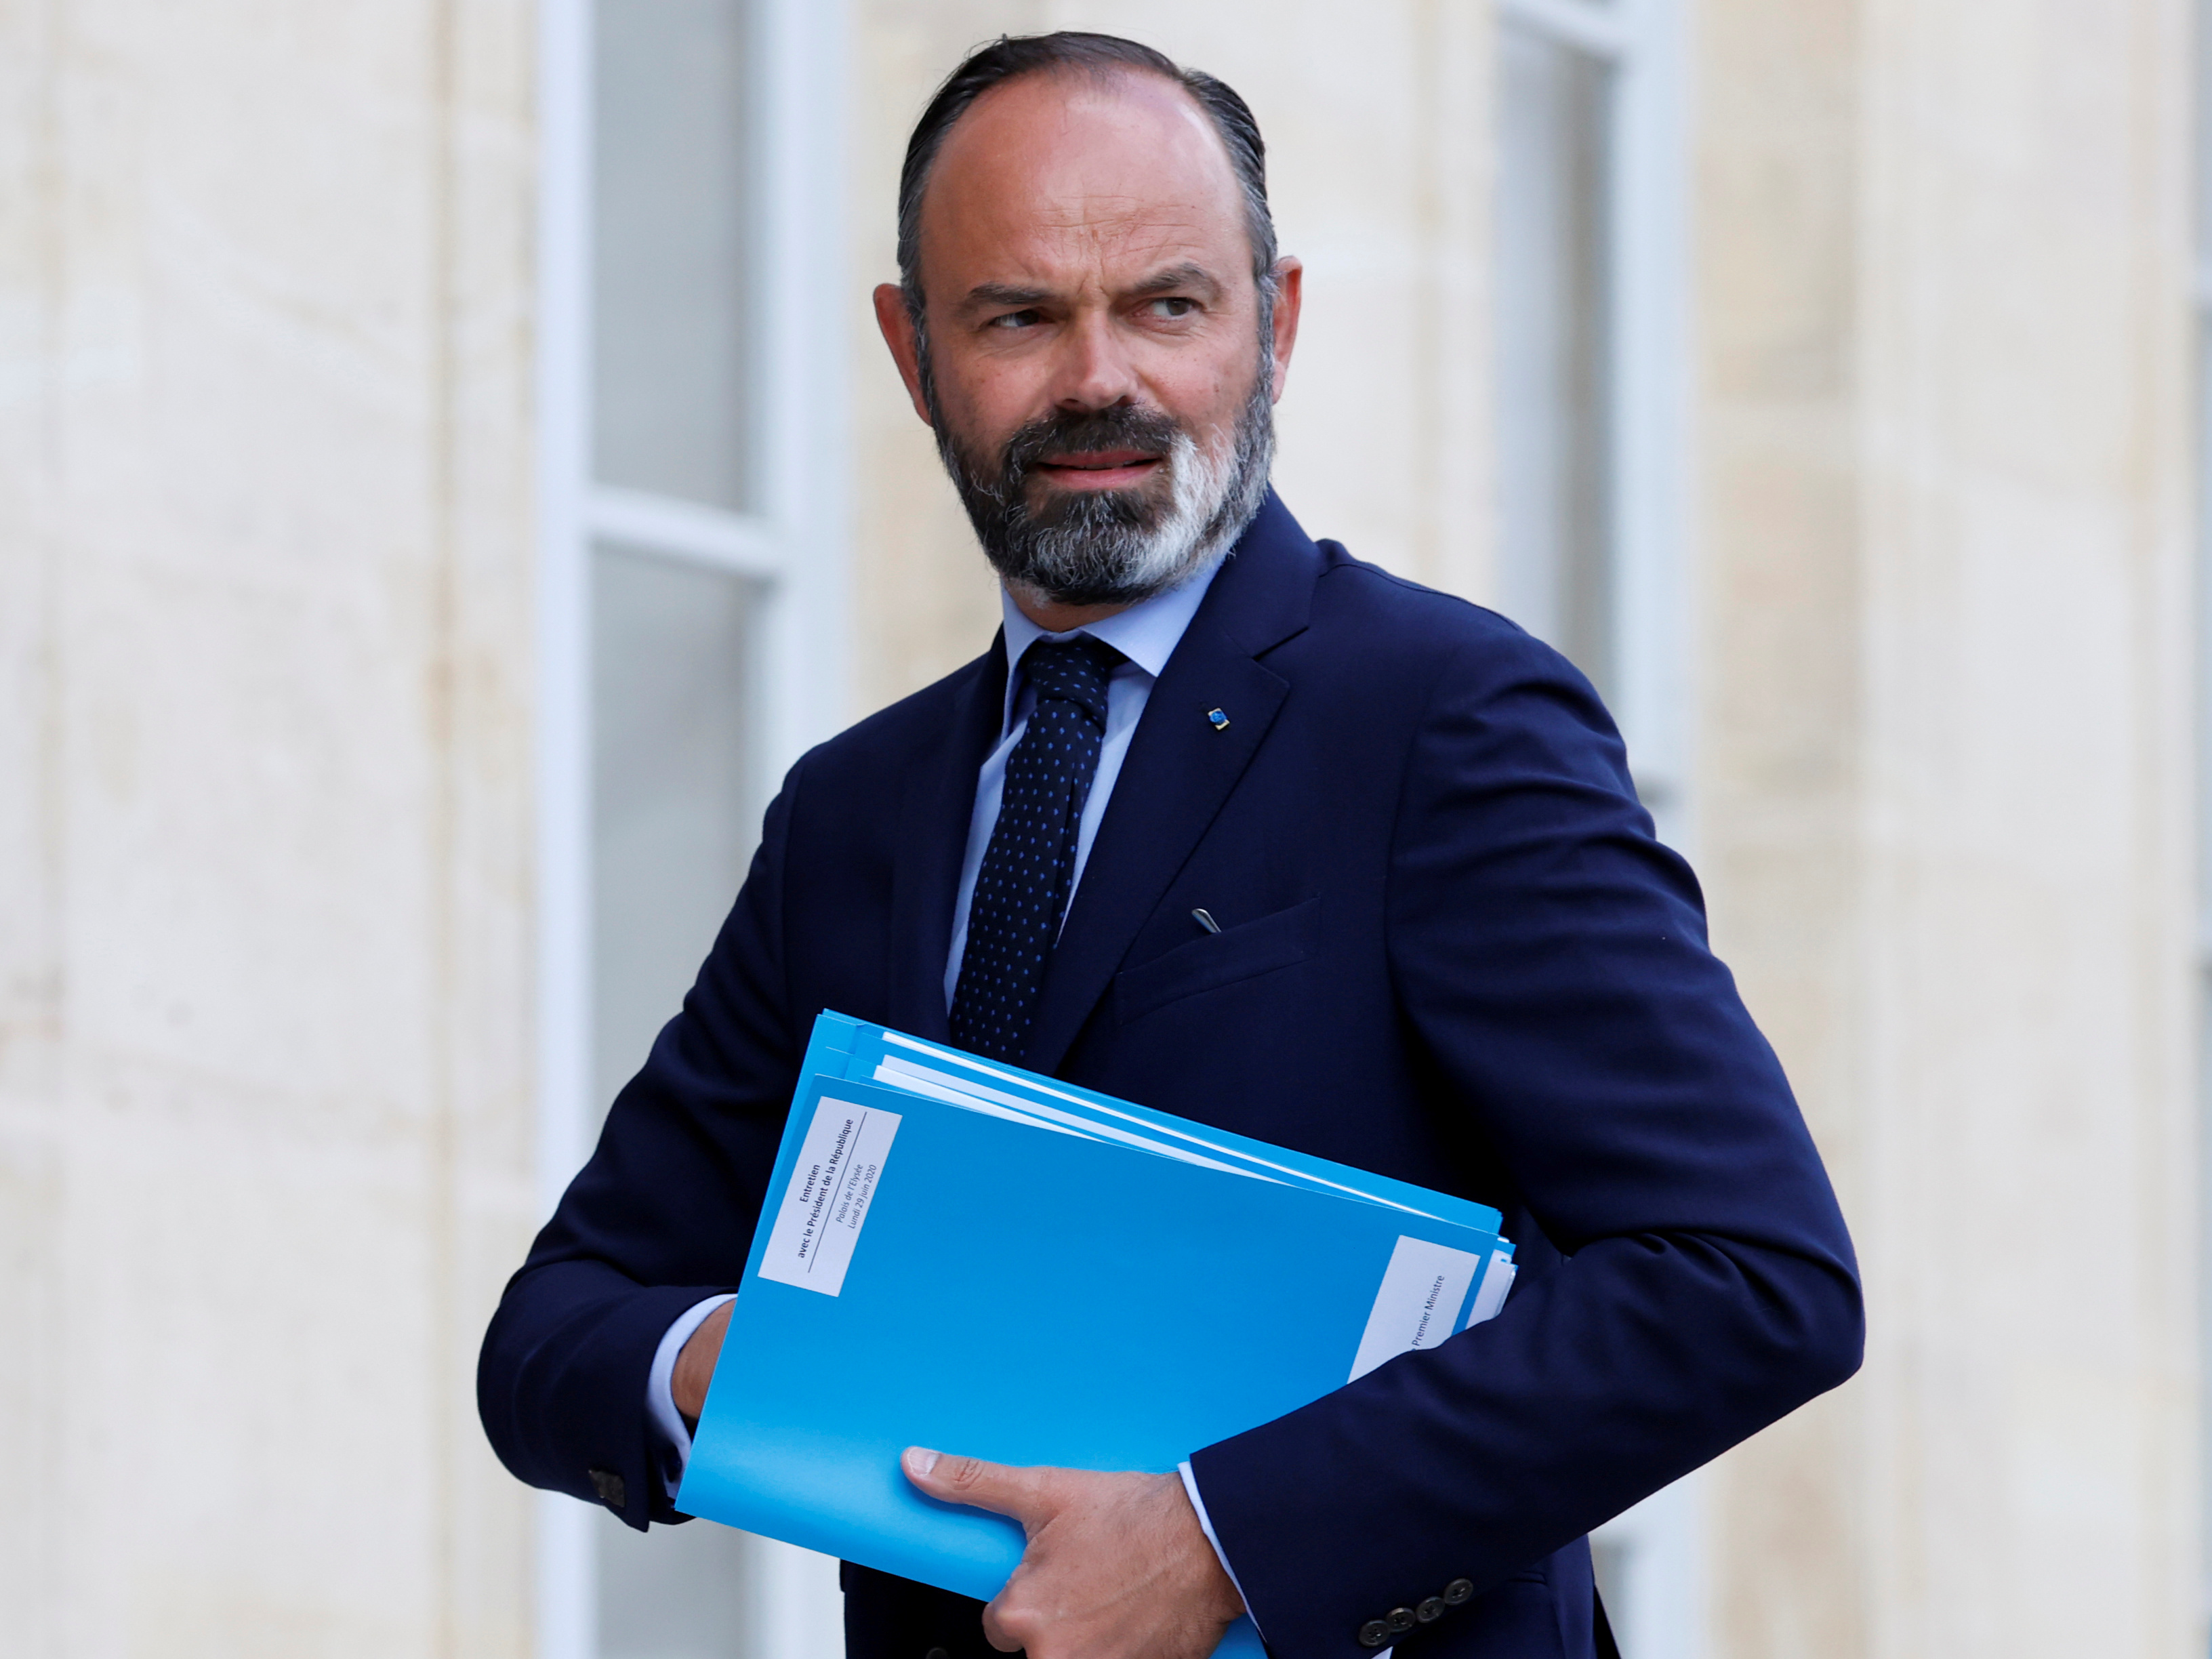 FILE PHOTO: French Prime Minister Edouard Philippe arrives for a meeting with members of the Citizens' Convention on Climate (CCC) at the Elysee Palace in Paris, France June 29, 2020. REUTERS/Christian Hartmann/File Photo